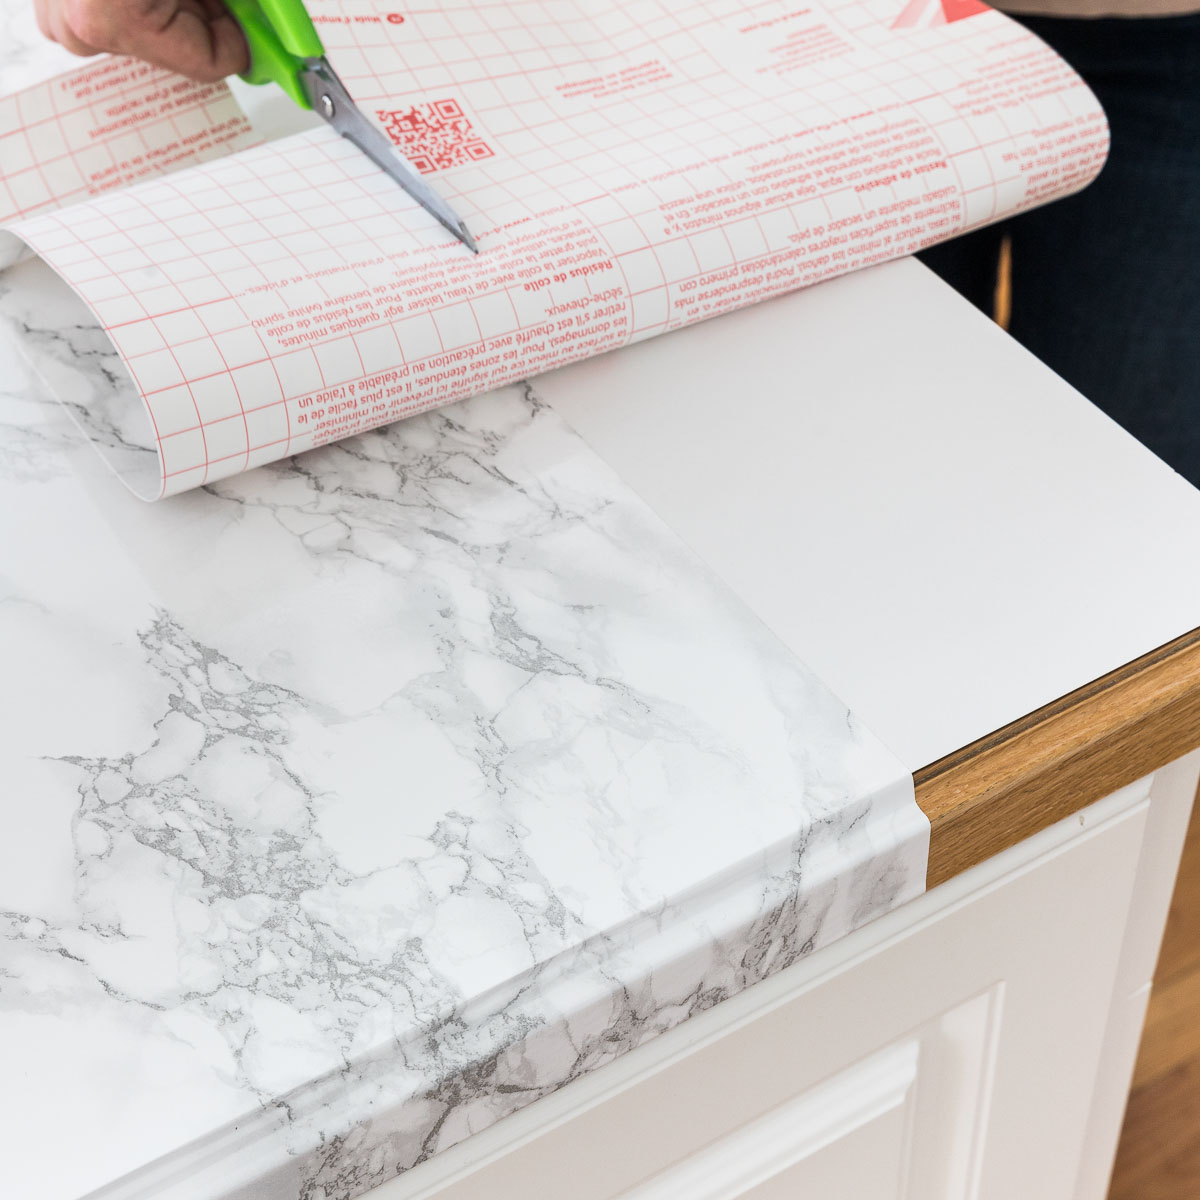 8 Tips for Using Contact Paper for Shelves